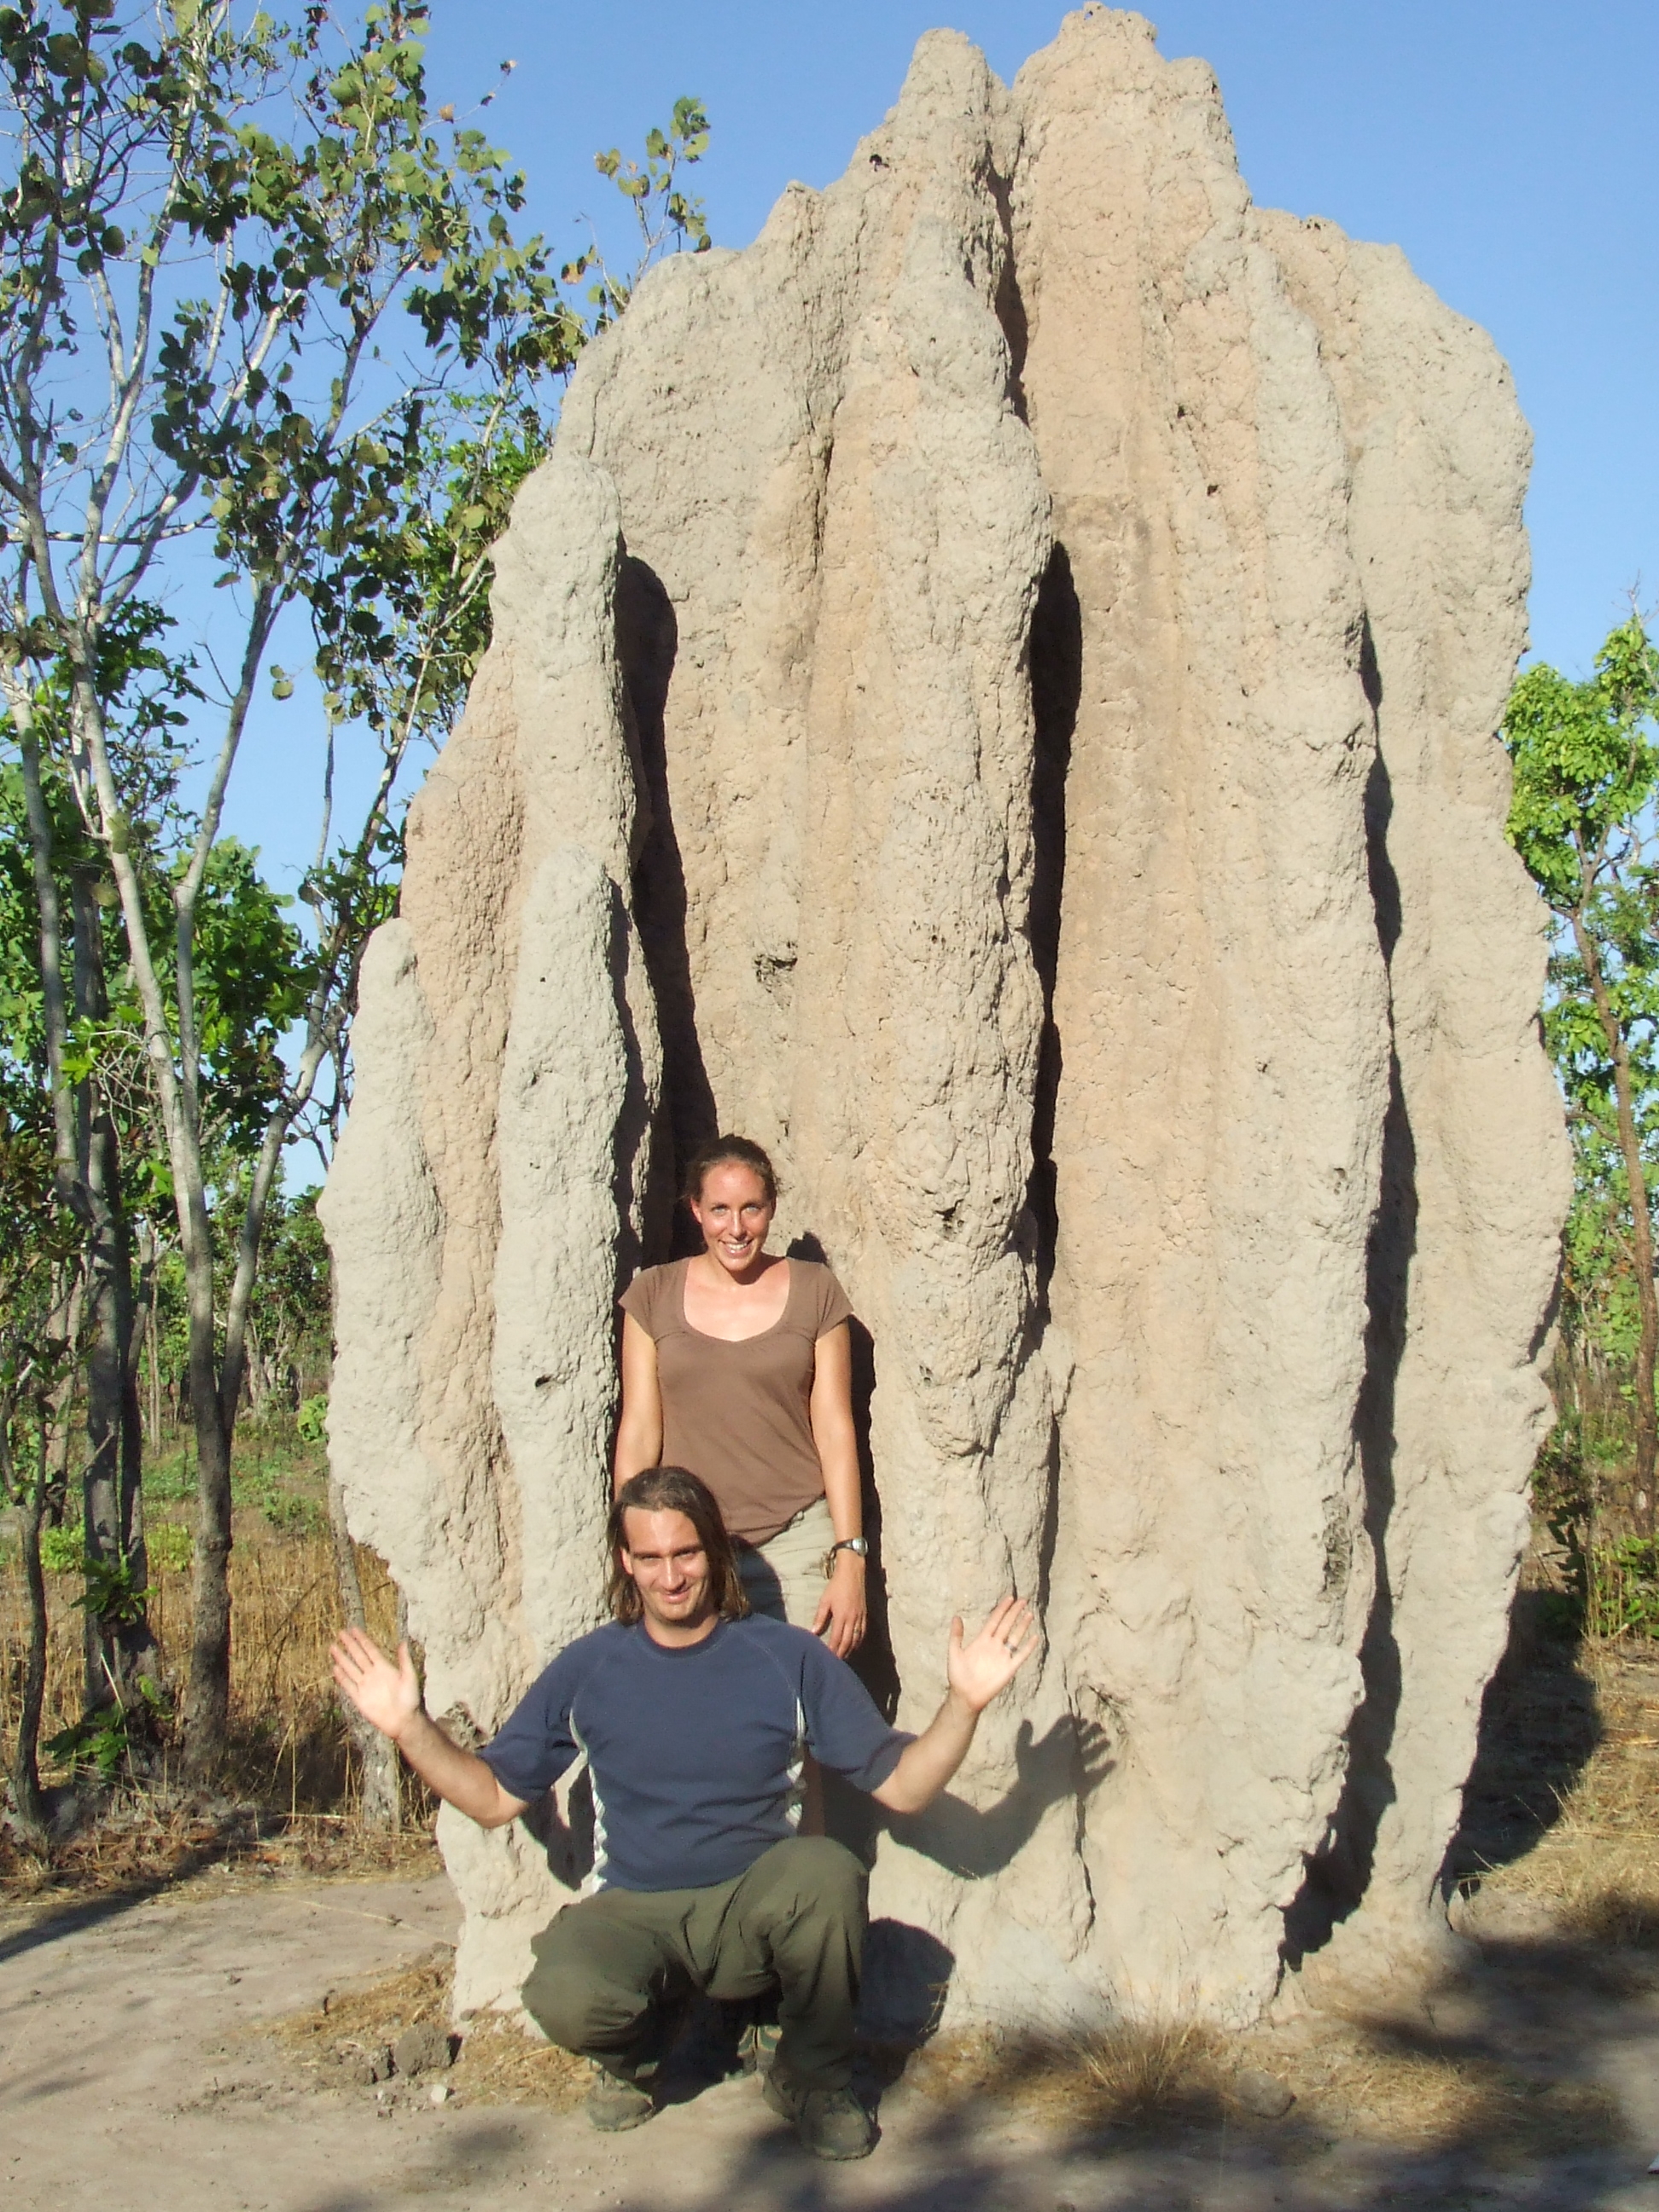 That's a monster termite mound!